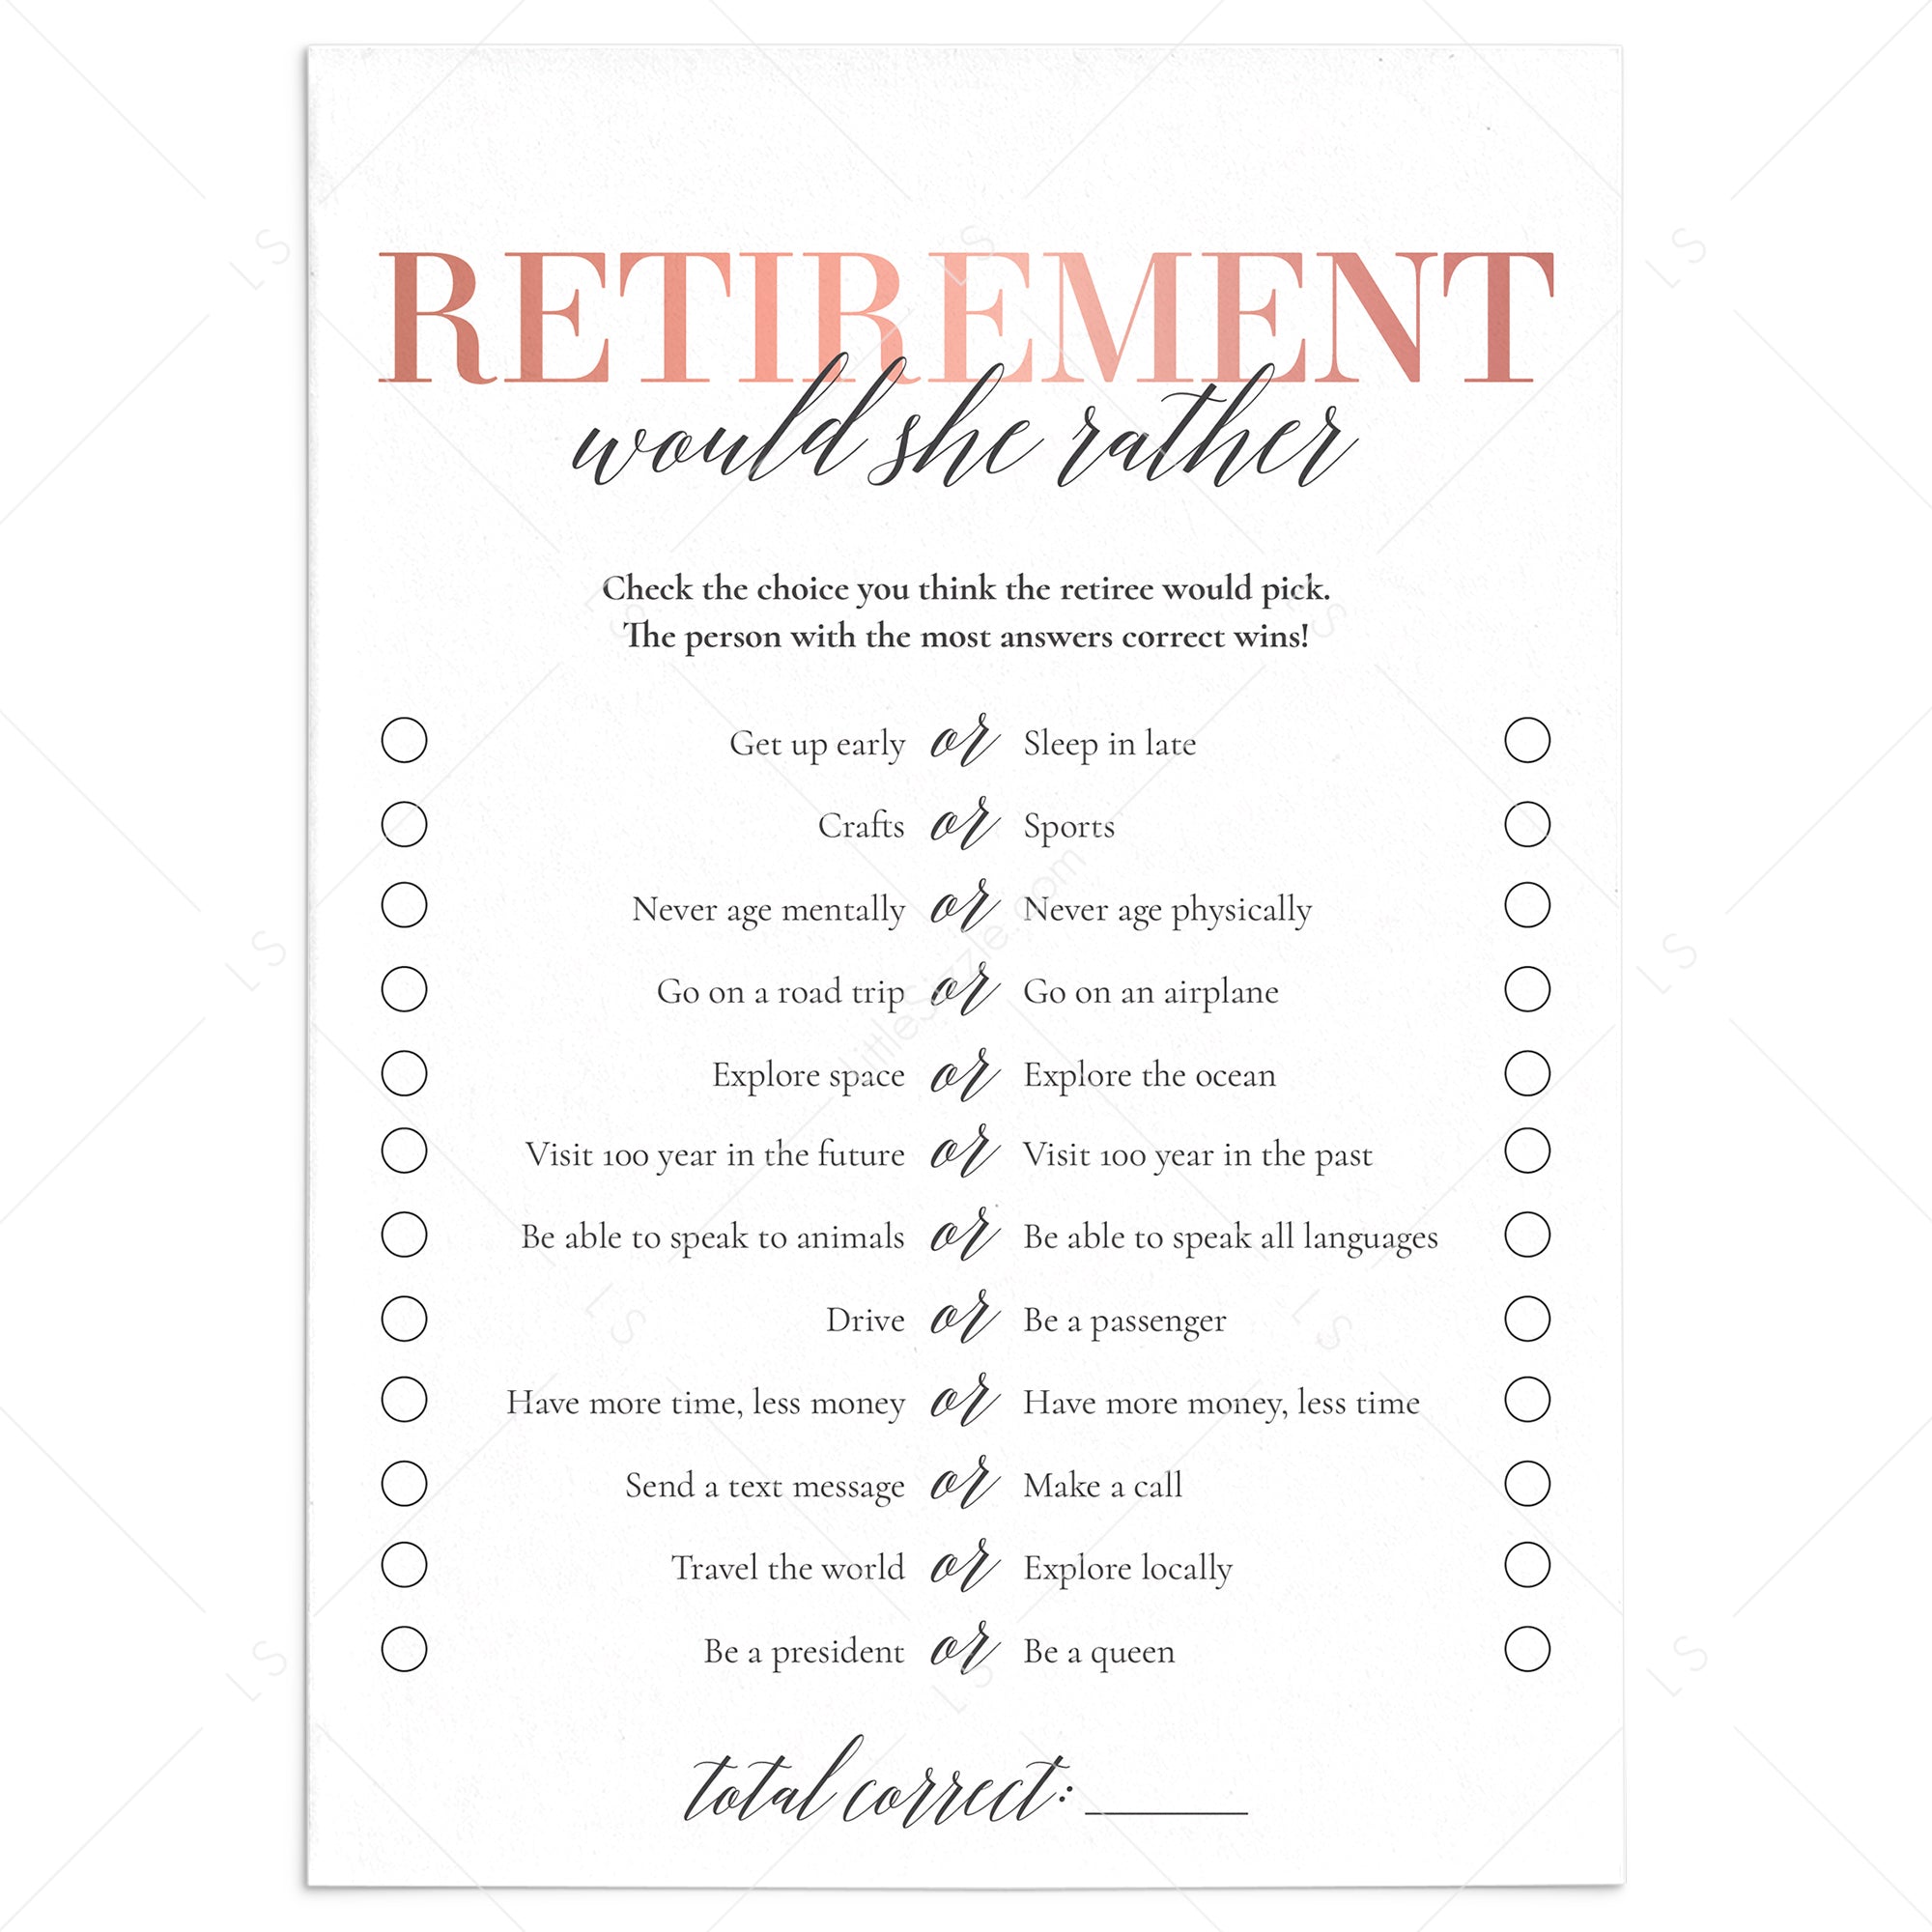 Retirement Party Games Free Printable